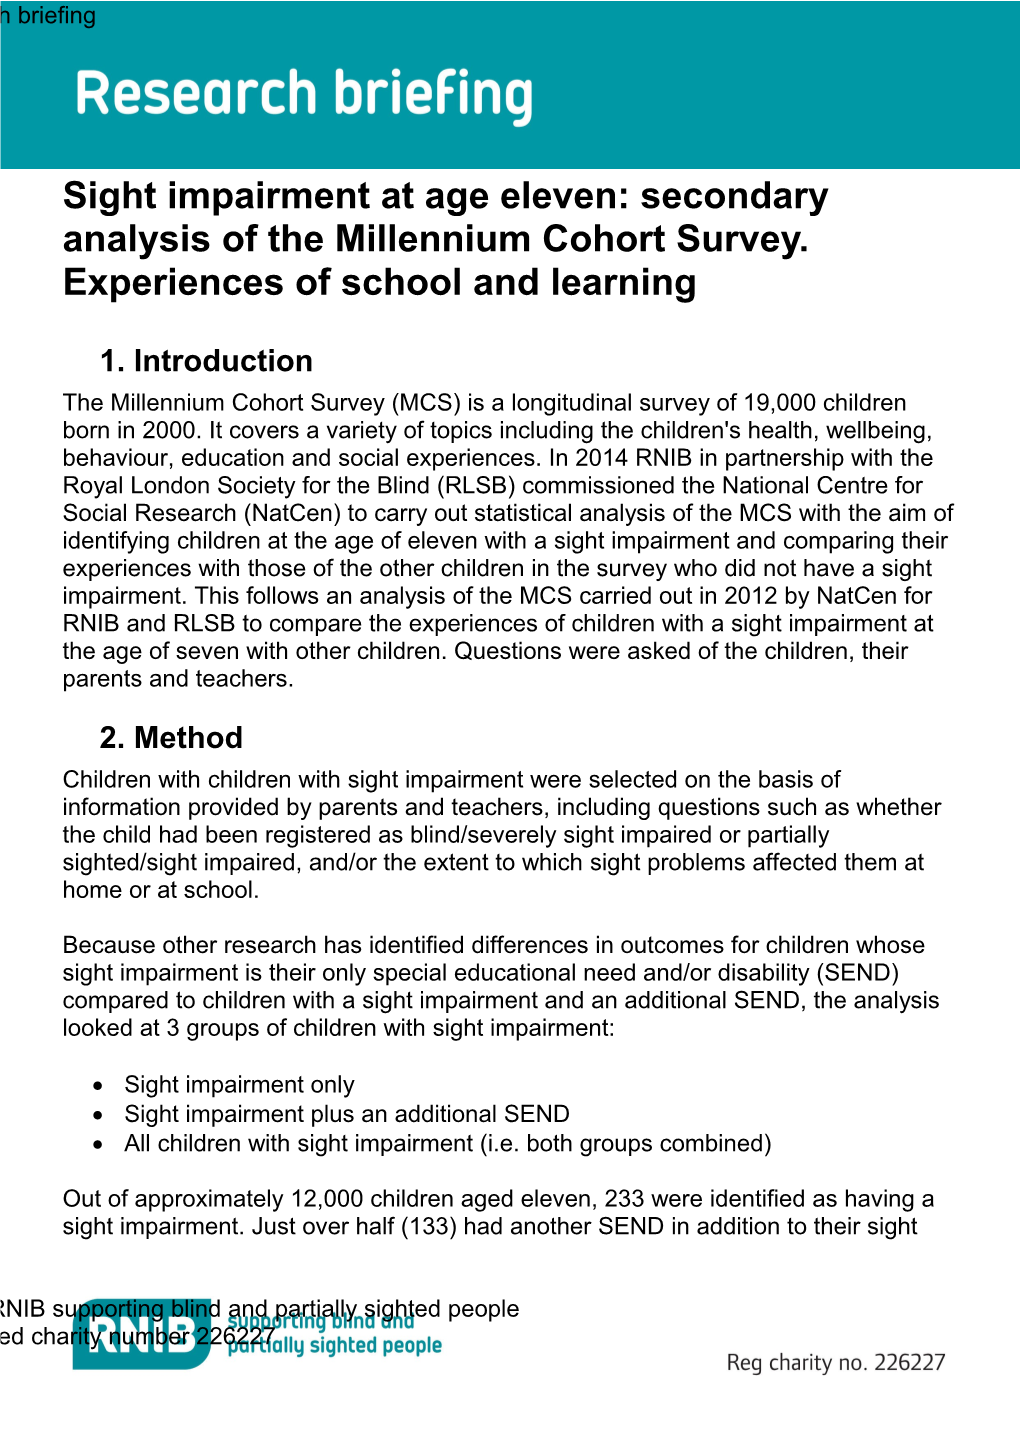 Sight Impaired at Age Seven: Secondary Analysis of the Millennium Cohort Survey